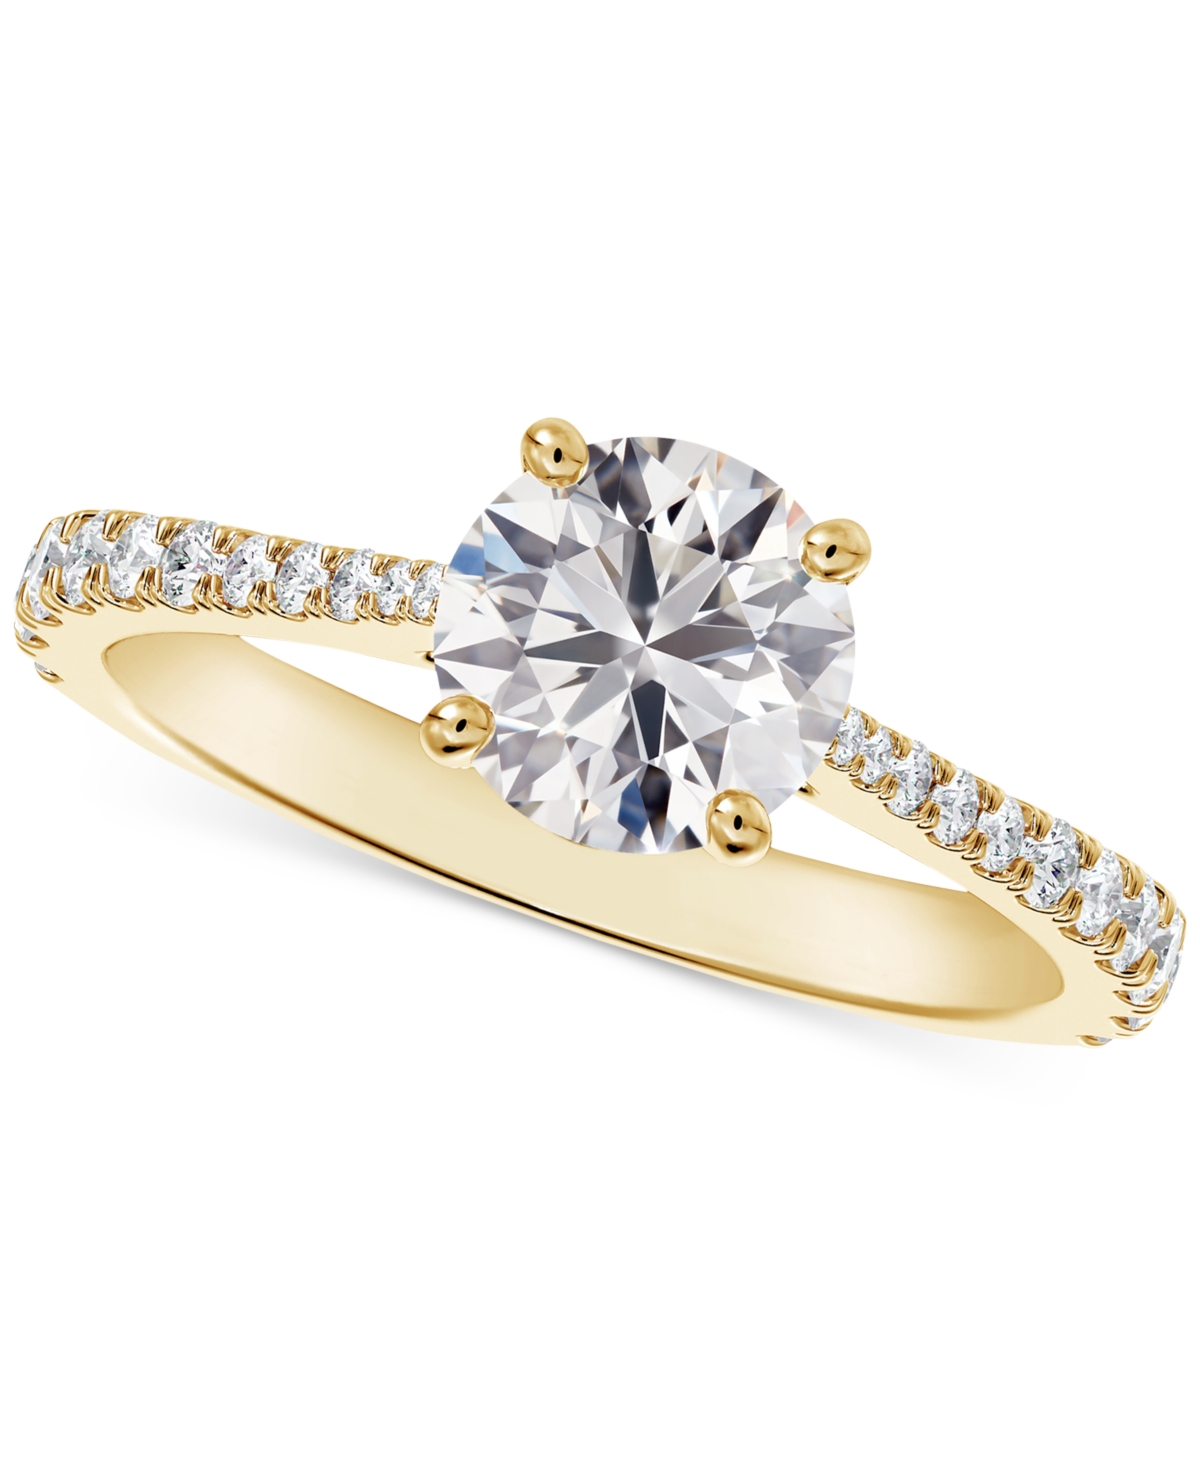 De Beers Forevermark Portfolio by De Beers Forevermark Diamond Engagement Ring (7/8 ct. t.w.) in 14k Whte or Yellow Gold